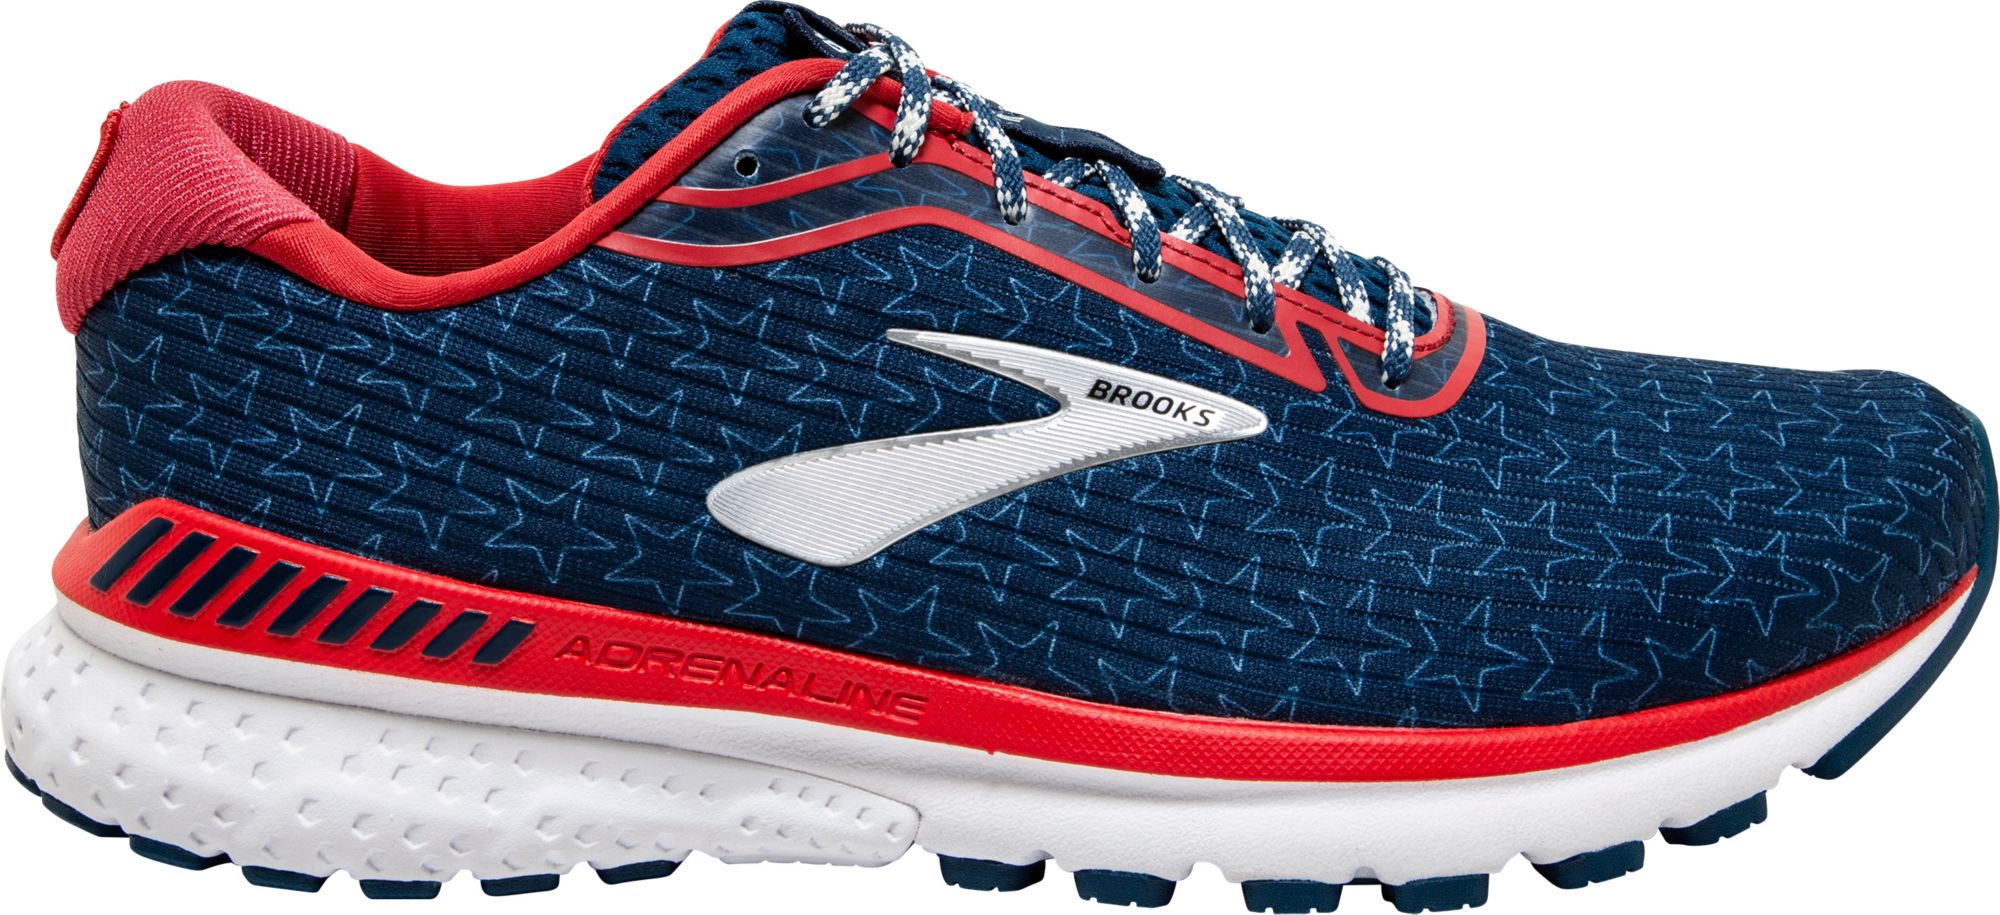 brooks red white blue shoes